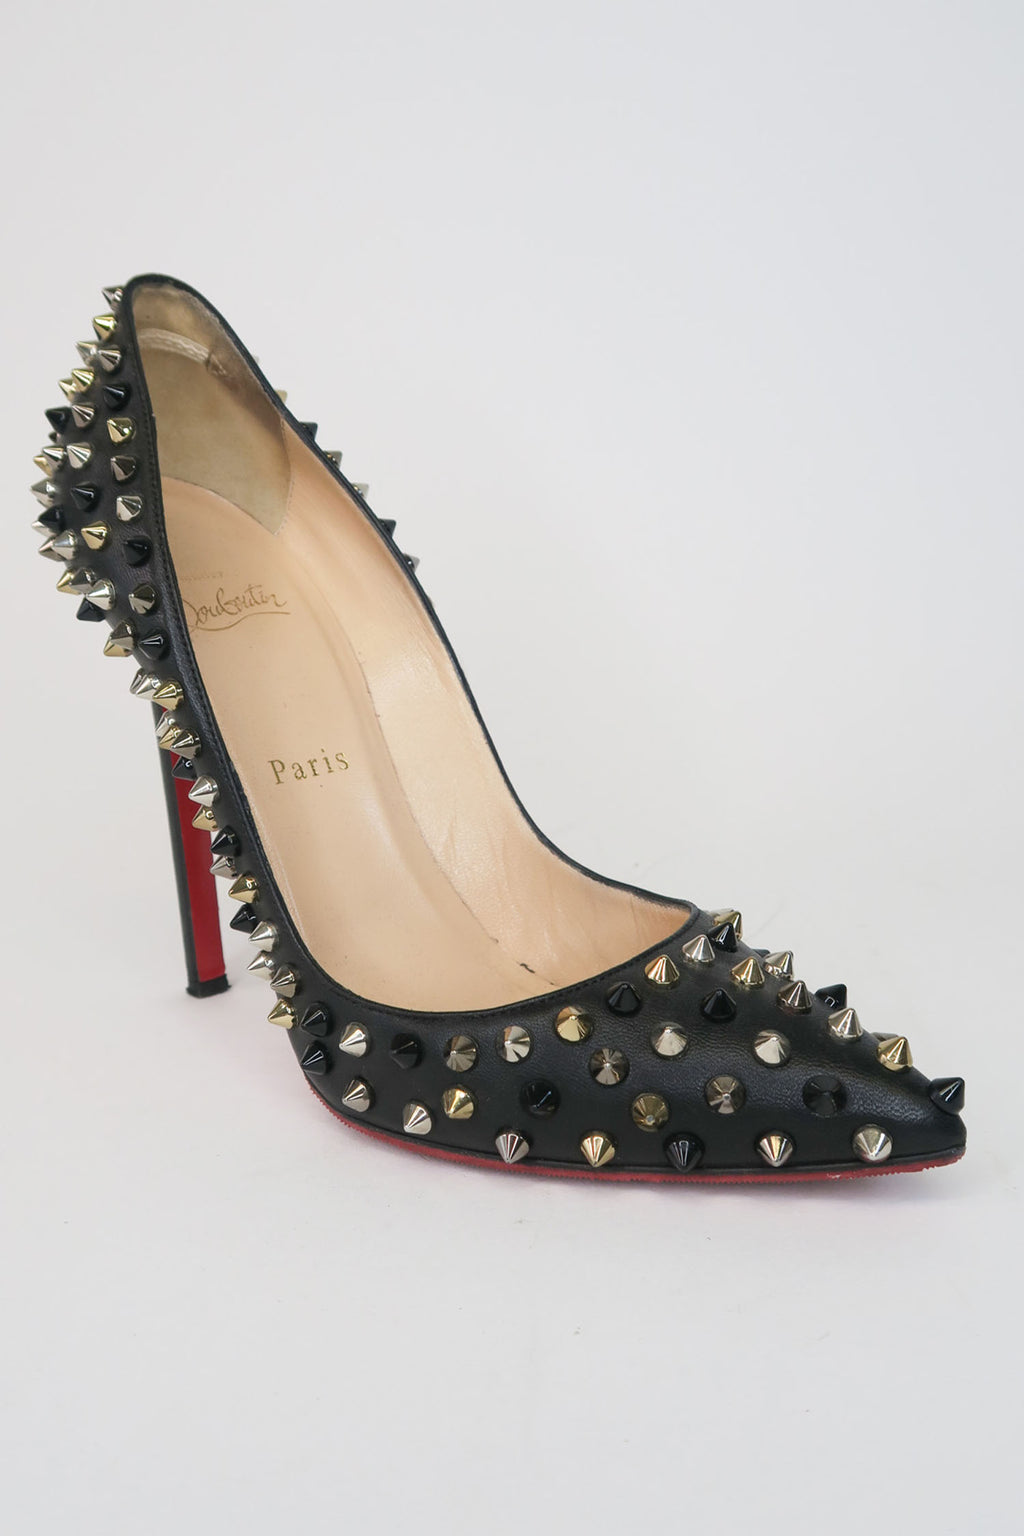 Christian Louboutin Spike Accents Leather Pumps sz 38